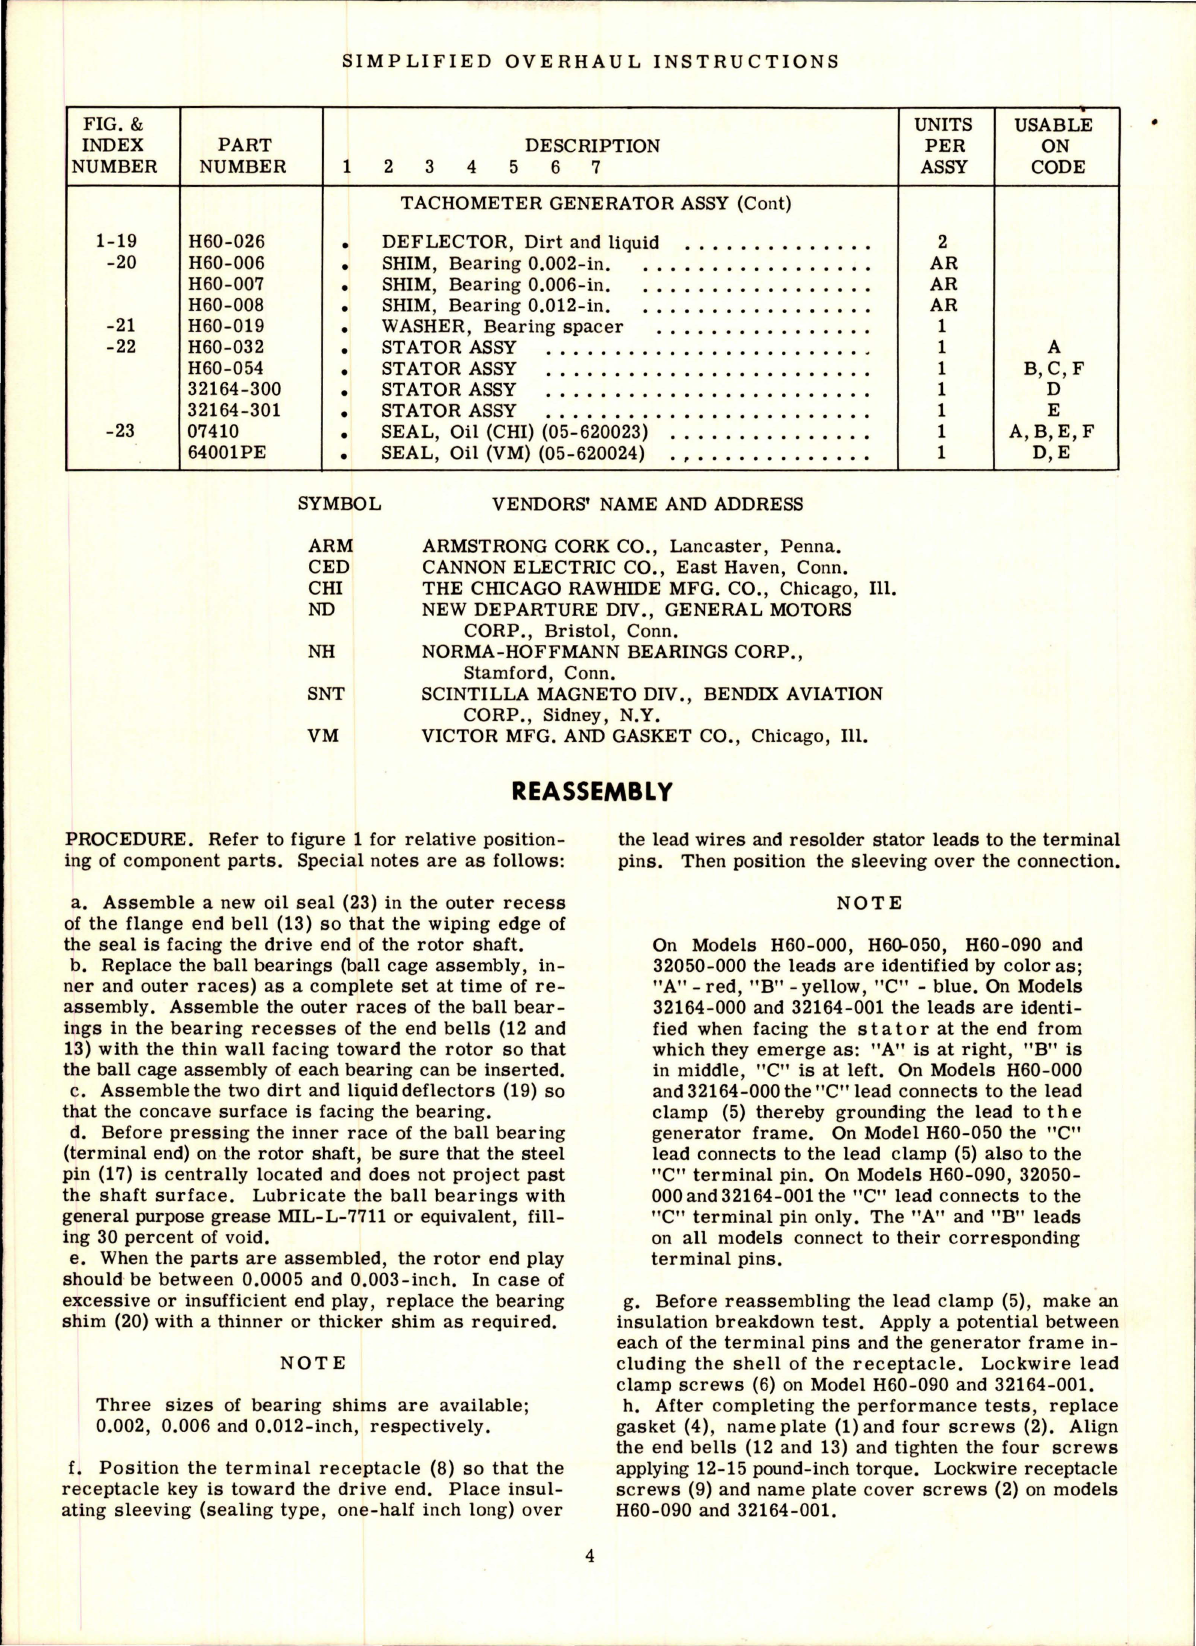 Sample page 5 from AirCorps Library document: Overhaul Instructions for Tachometer Generators 